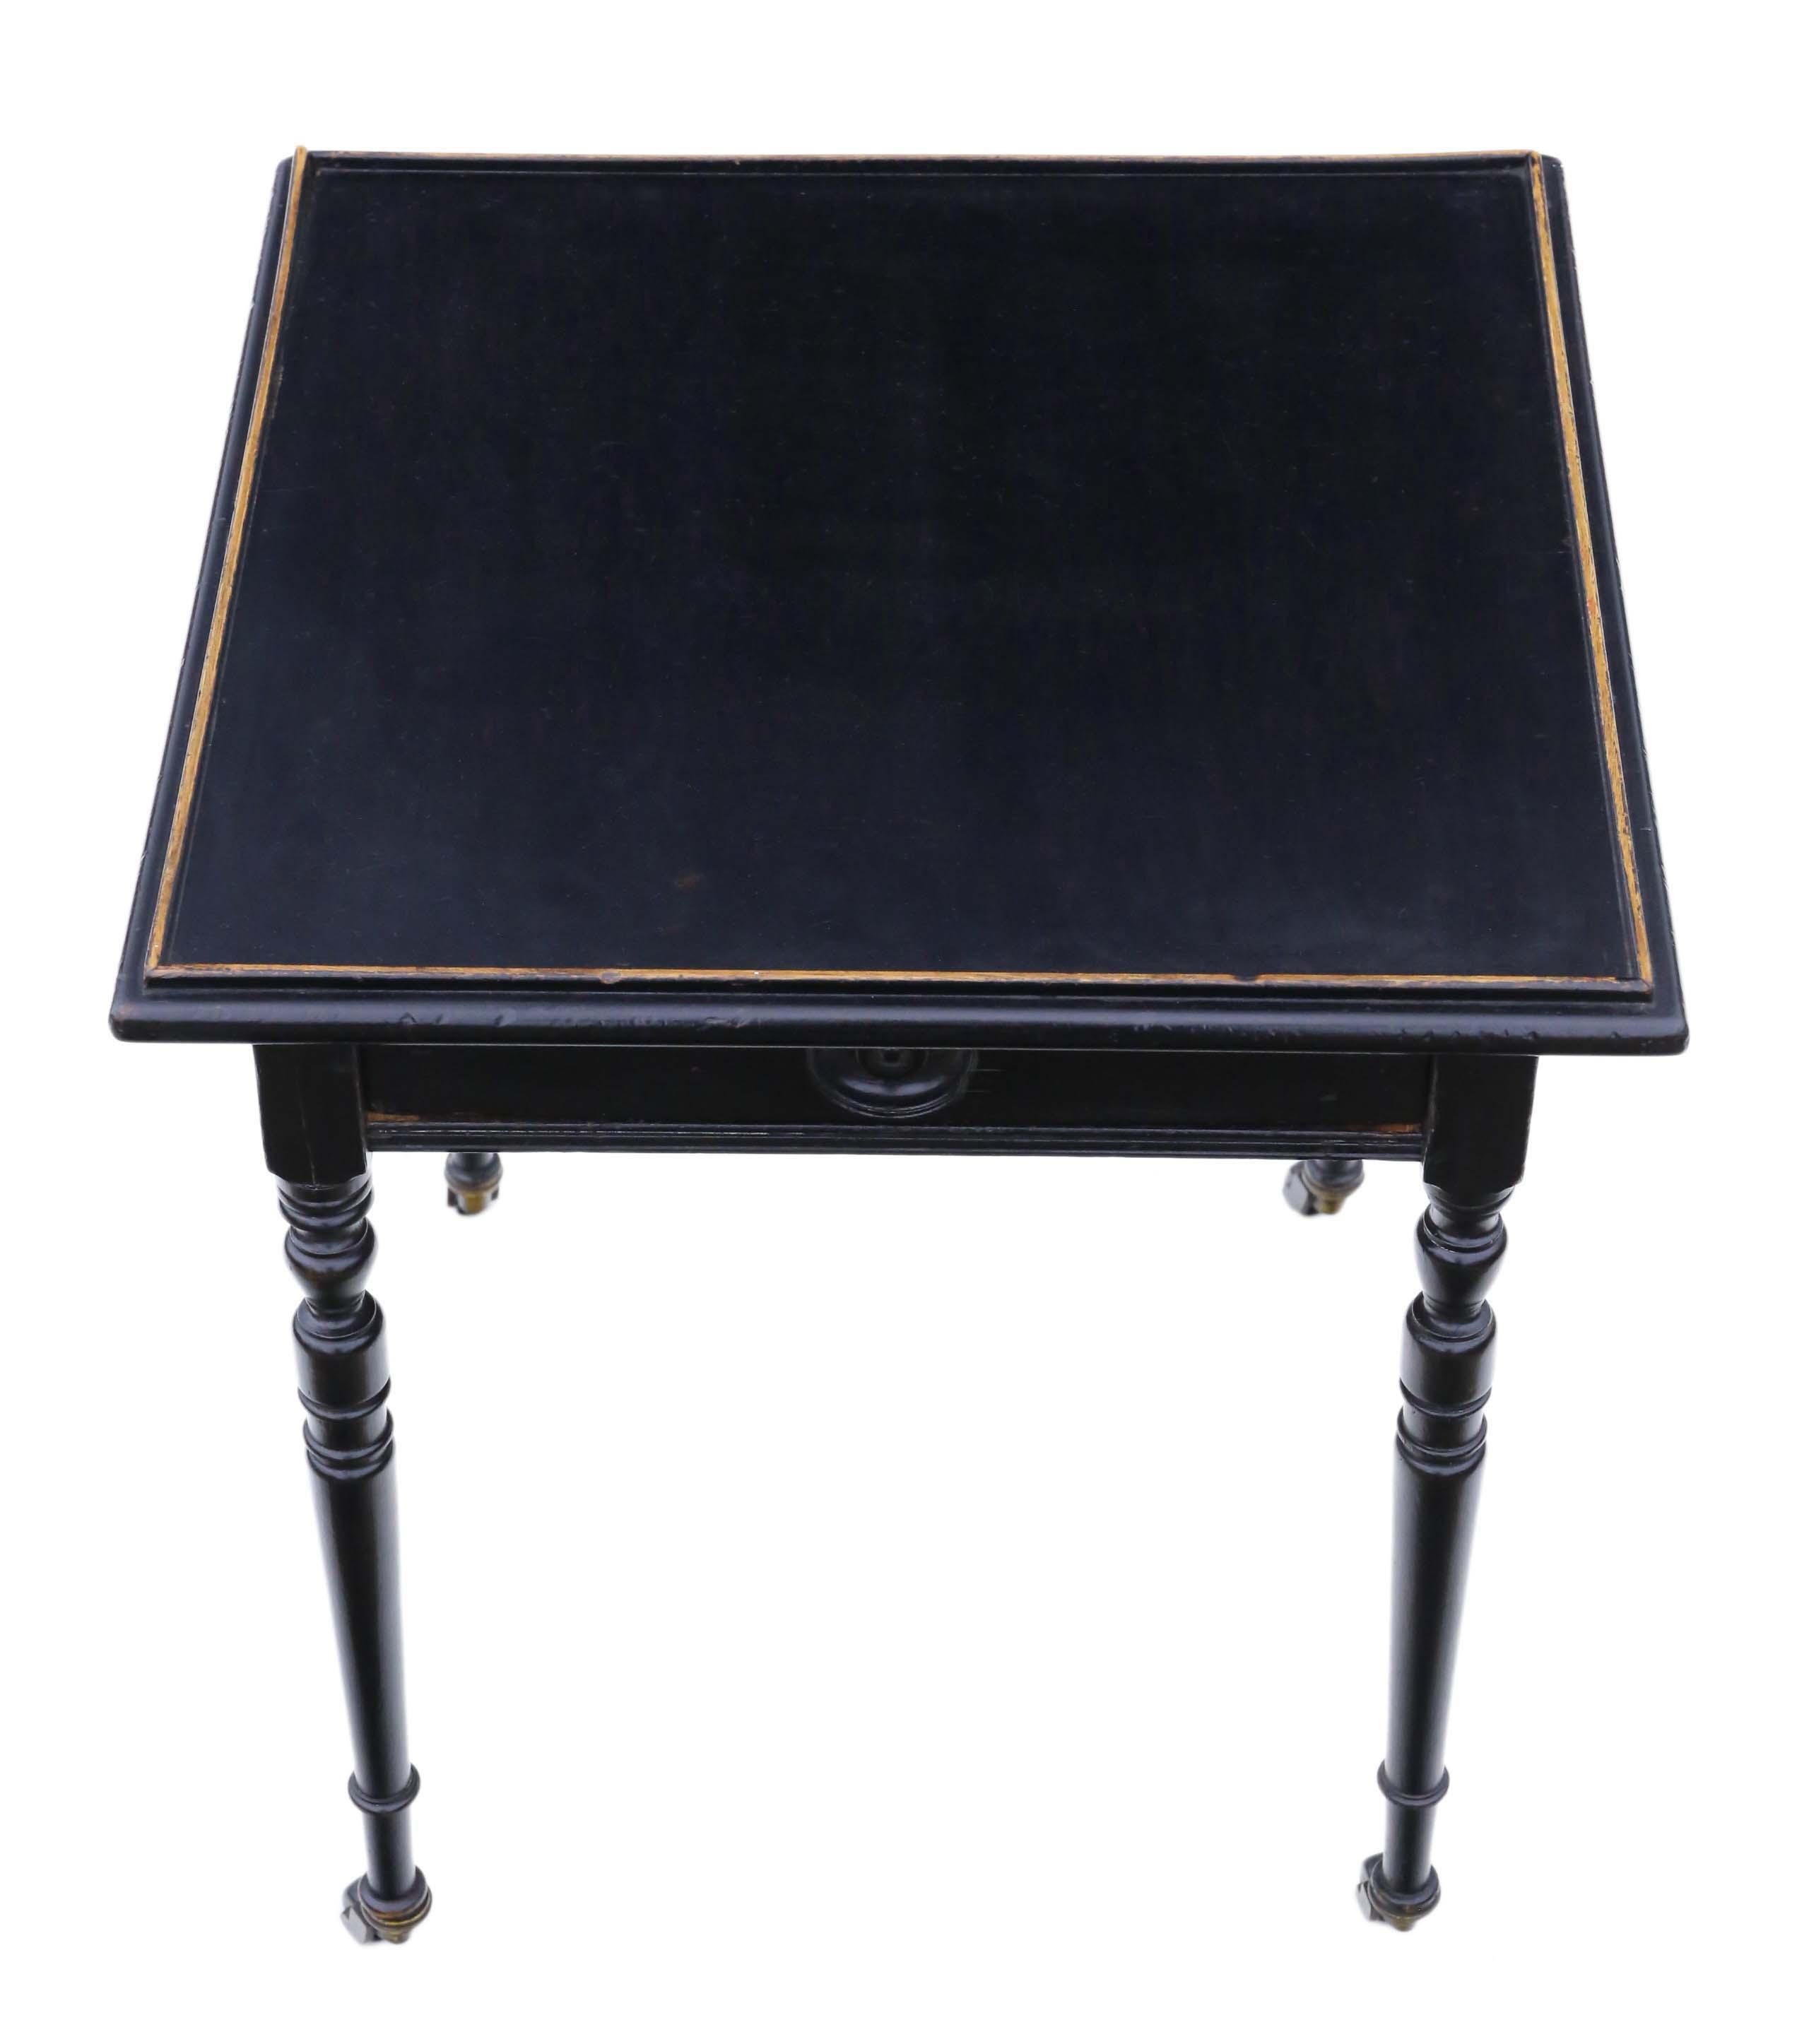 Antique Victorian C1880 ebonised and gilt side, occasional, lamp, coffee or wine table.

Stamped 'Edwards and Roberts', who are famous makers.

This is a lovely table, that is full of age, charm and character.

Rare and attractive. The